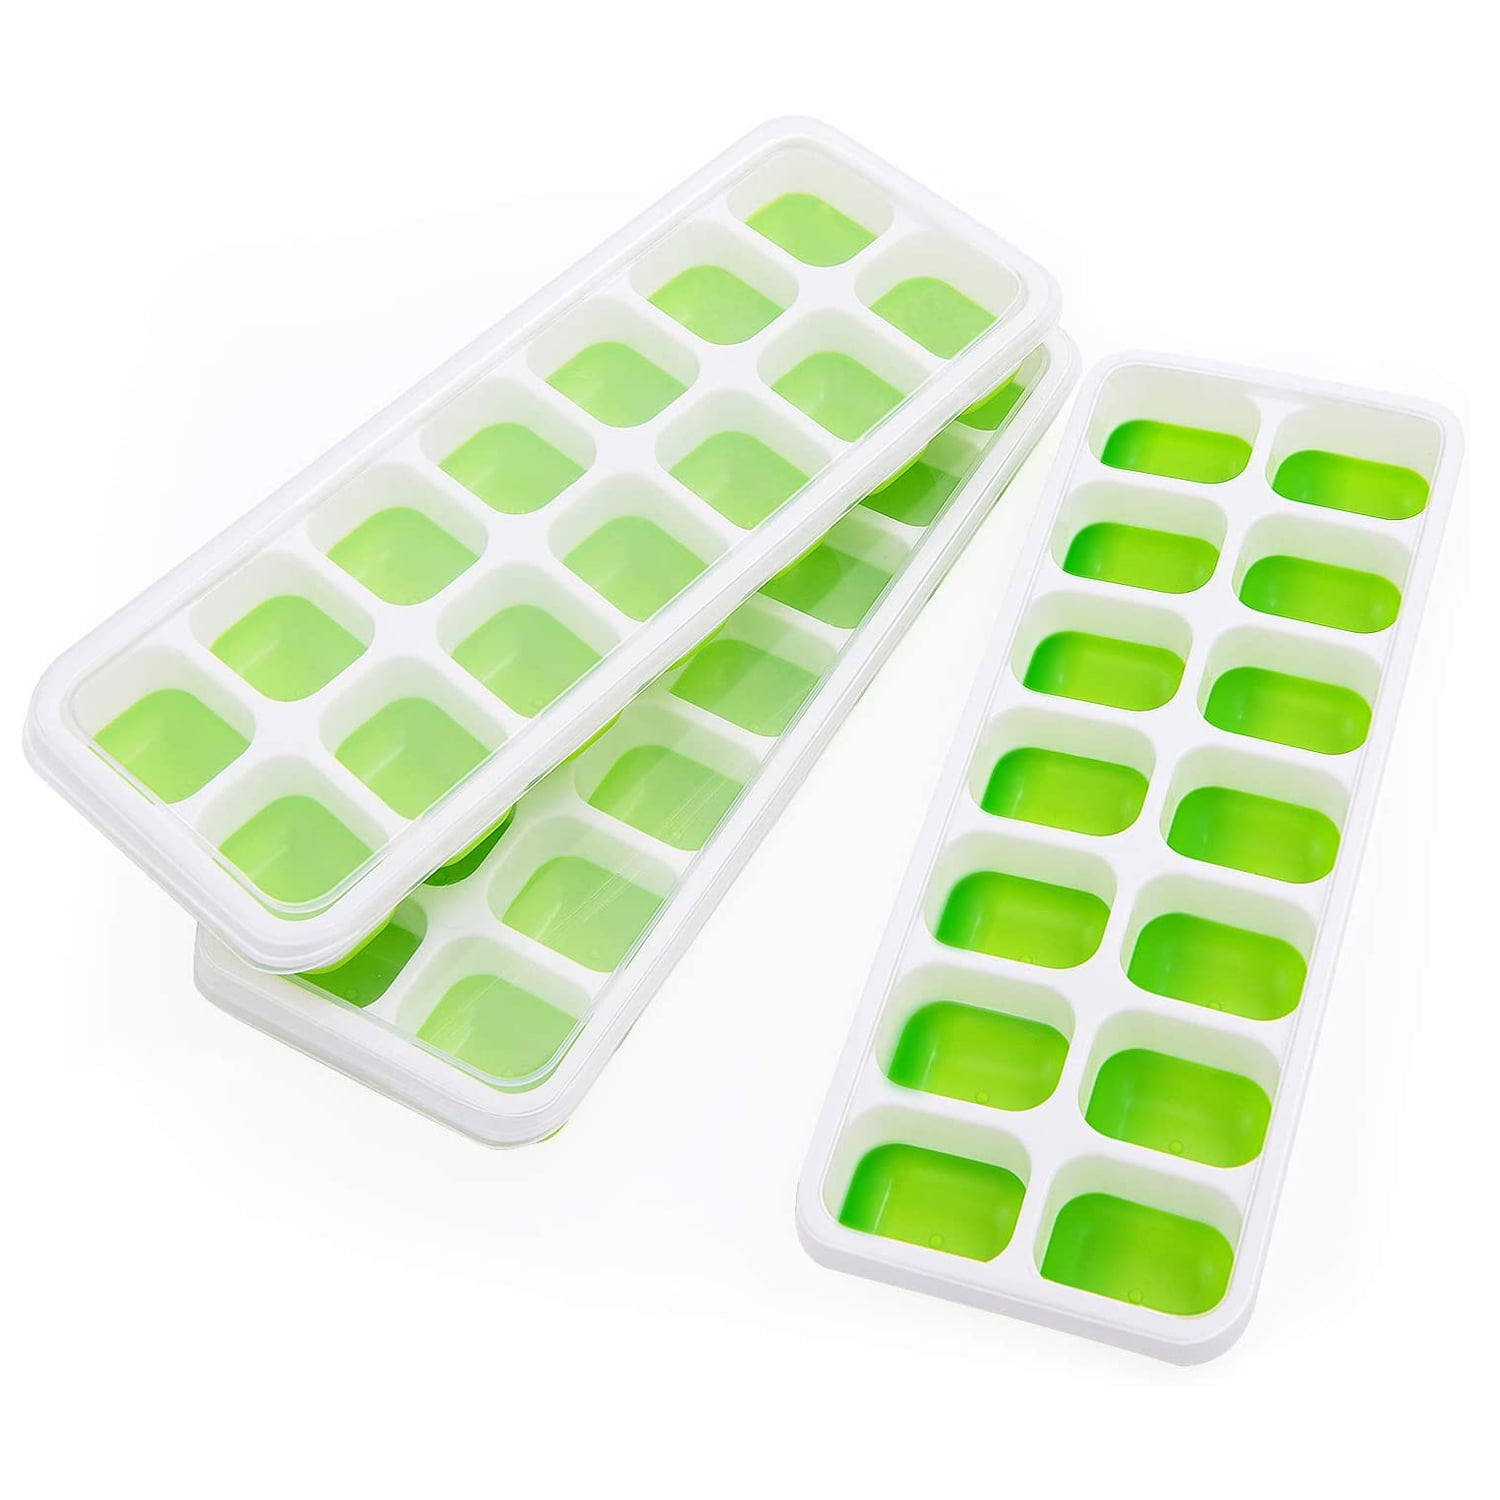 OMorc Ice Cube Trays 3 Pack Easy-Release 2 Ice Ball and 1 Ice Cube Maker Molds 